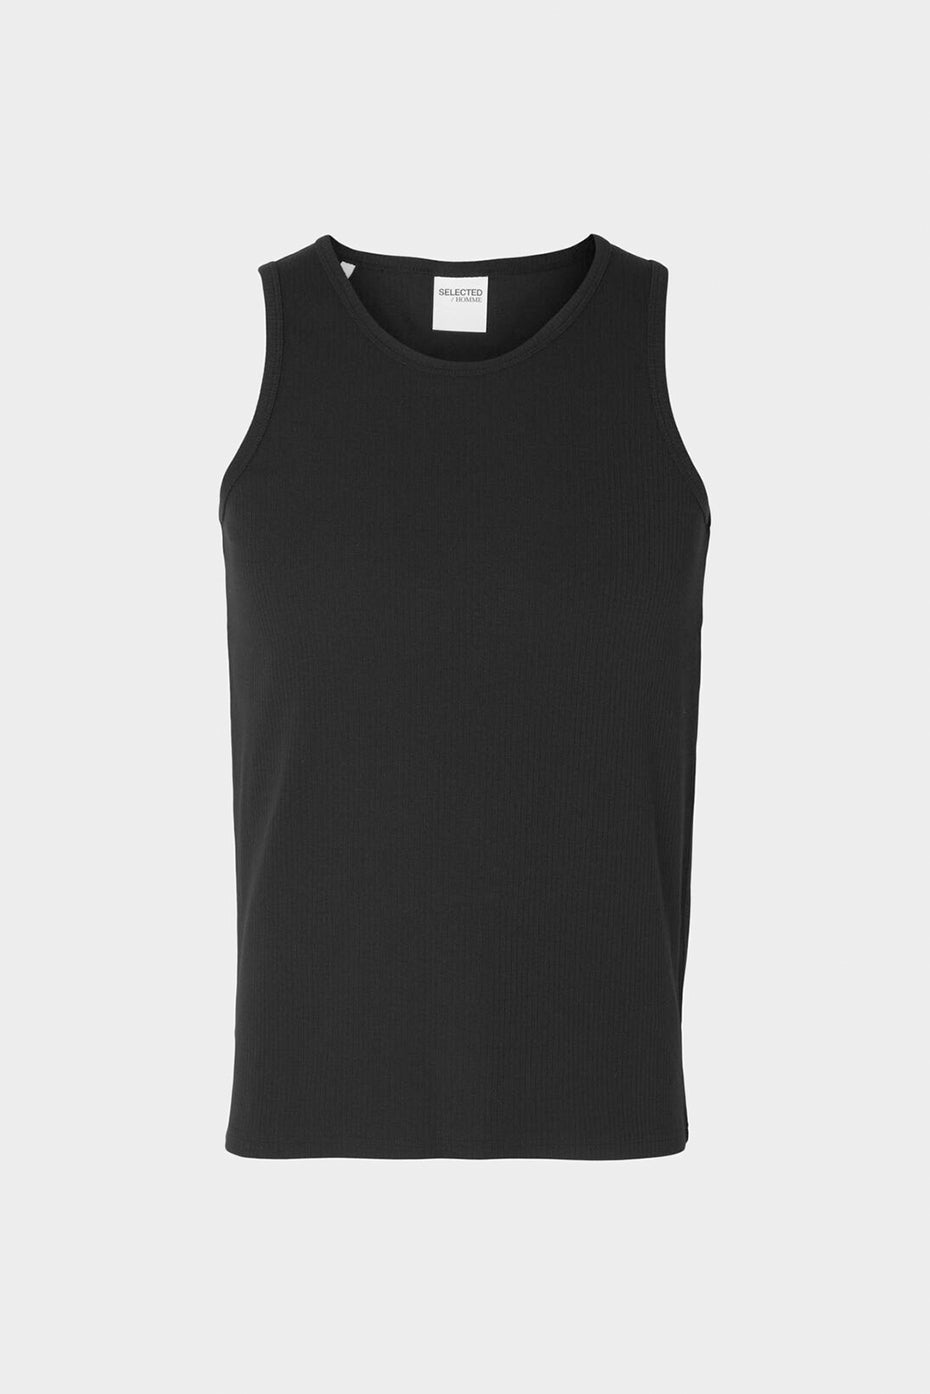 Selected Homme Black Spencer Rib Tank Top